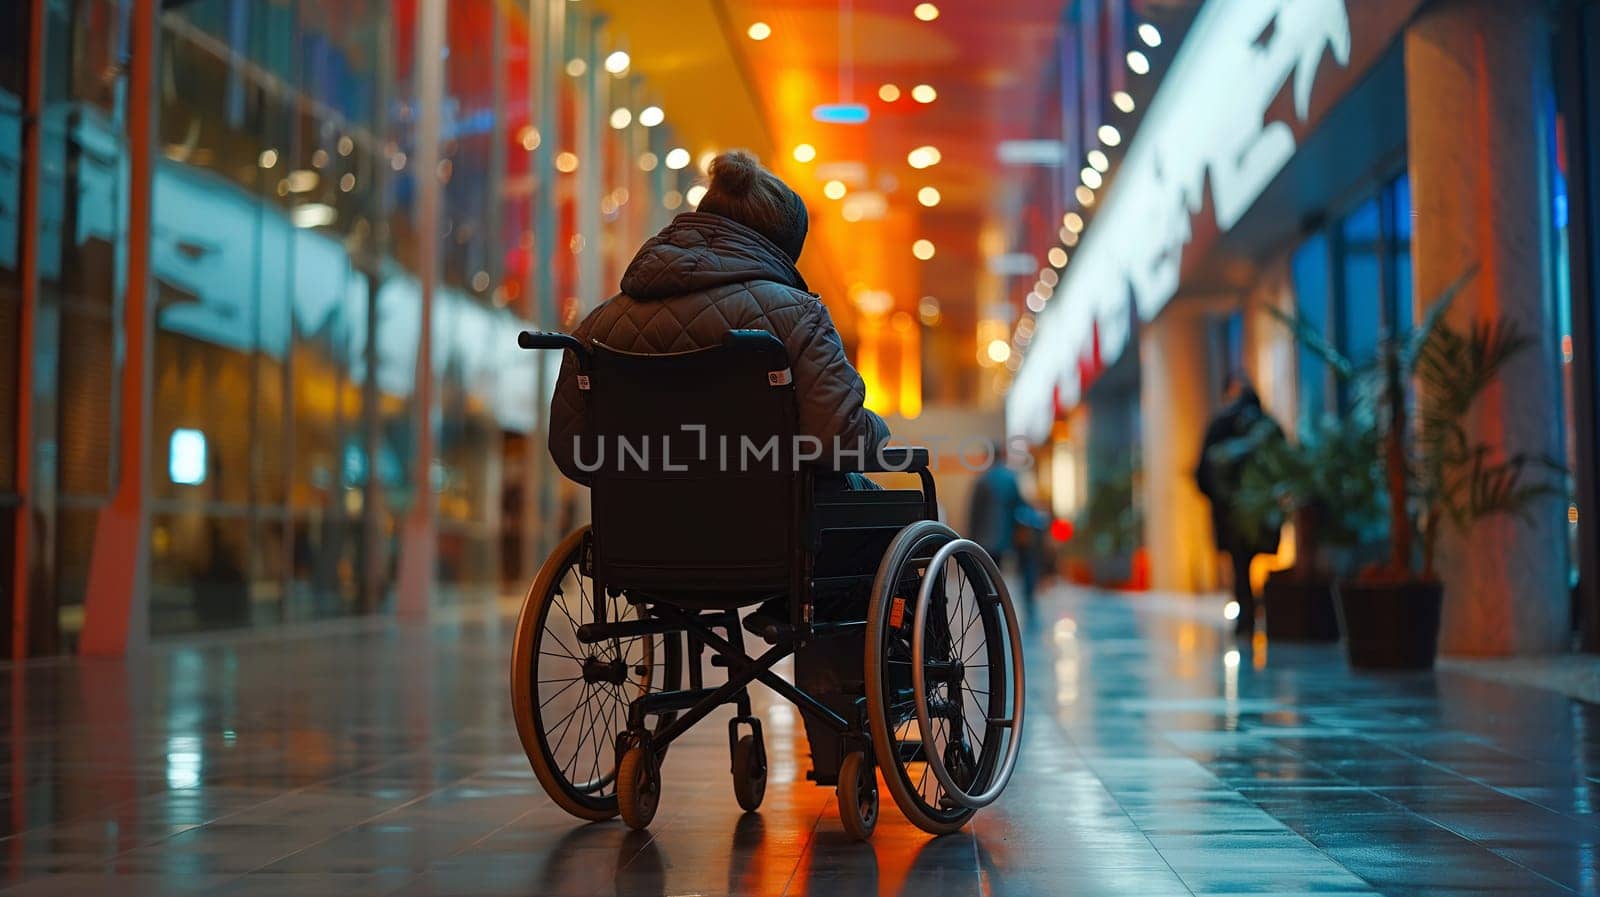 Solitary Wheelchair User in a Colorful Shopping Arcade at Dusk by chrisroll